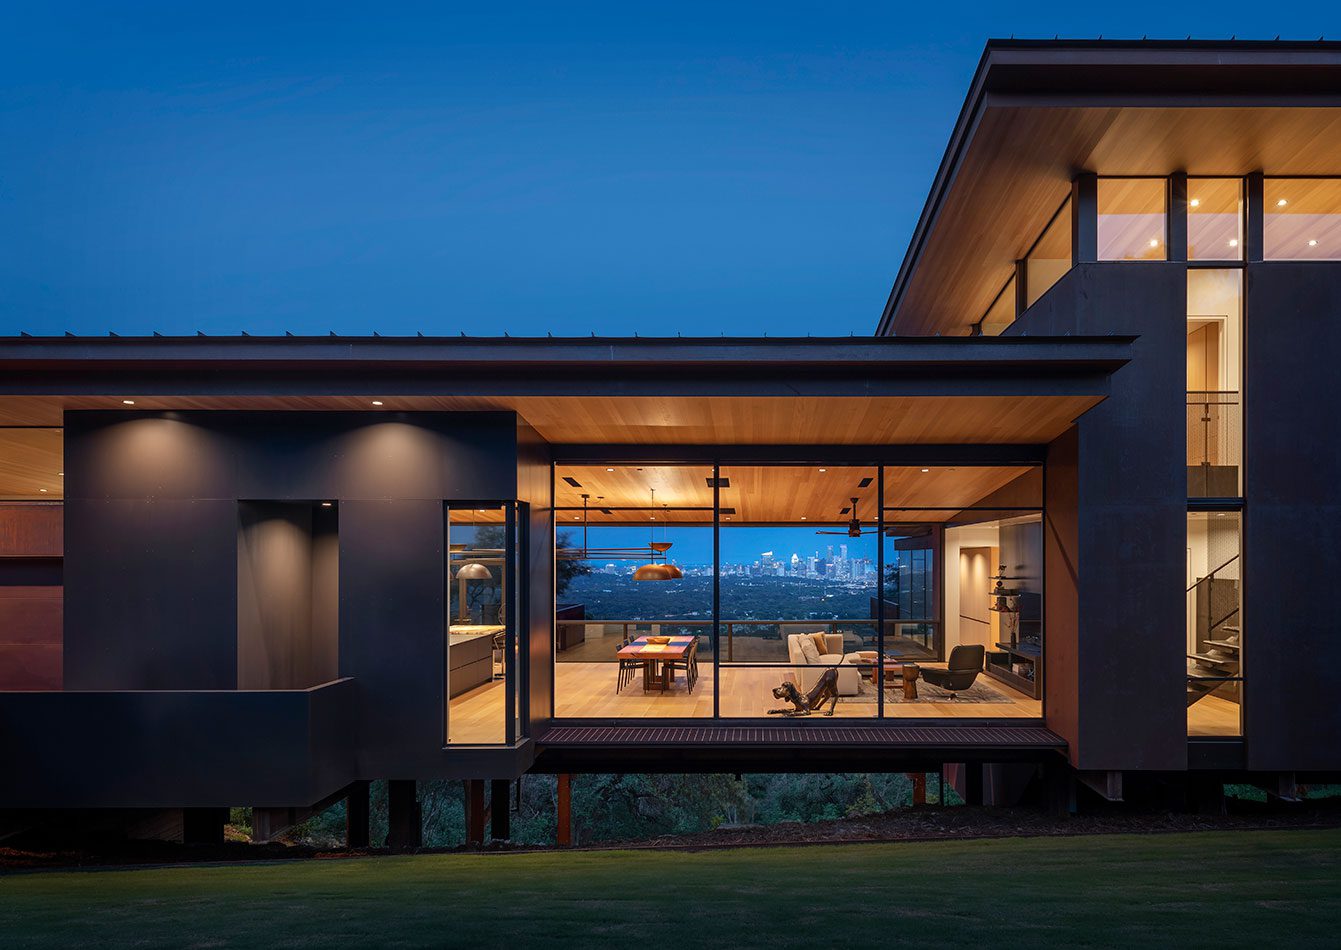 Exterior night view of lighted modern home with residential window walls